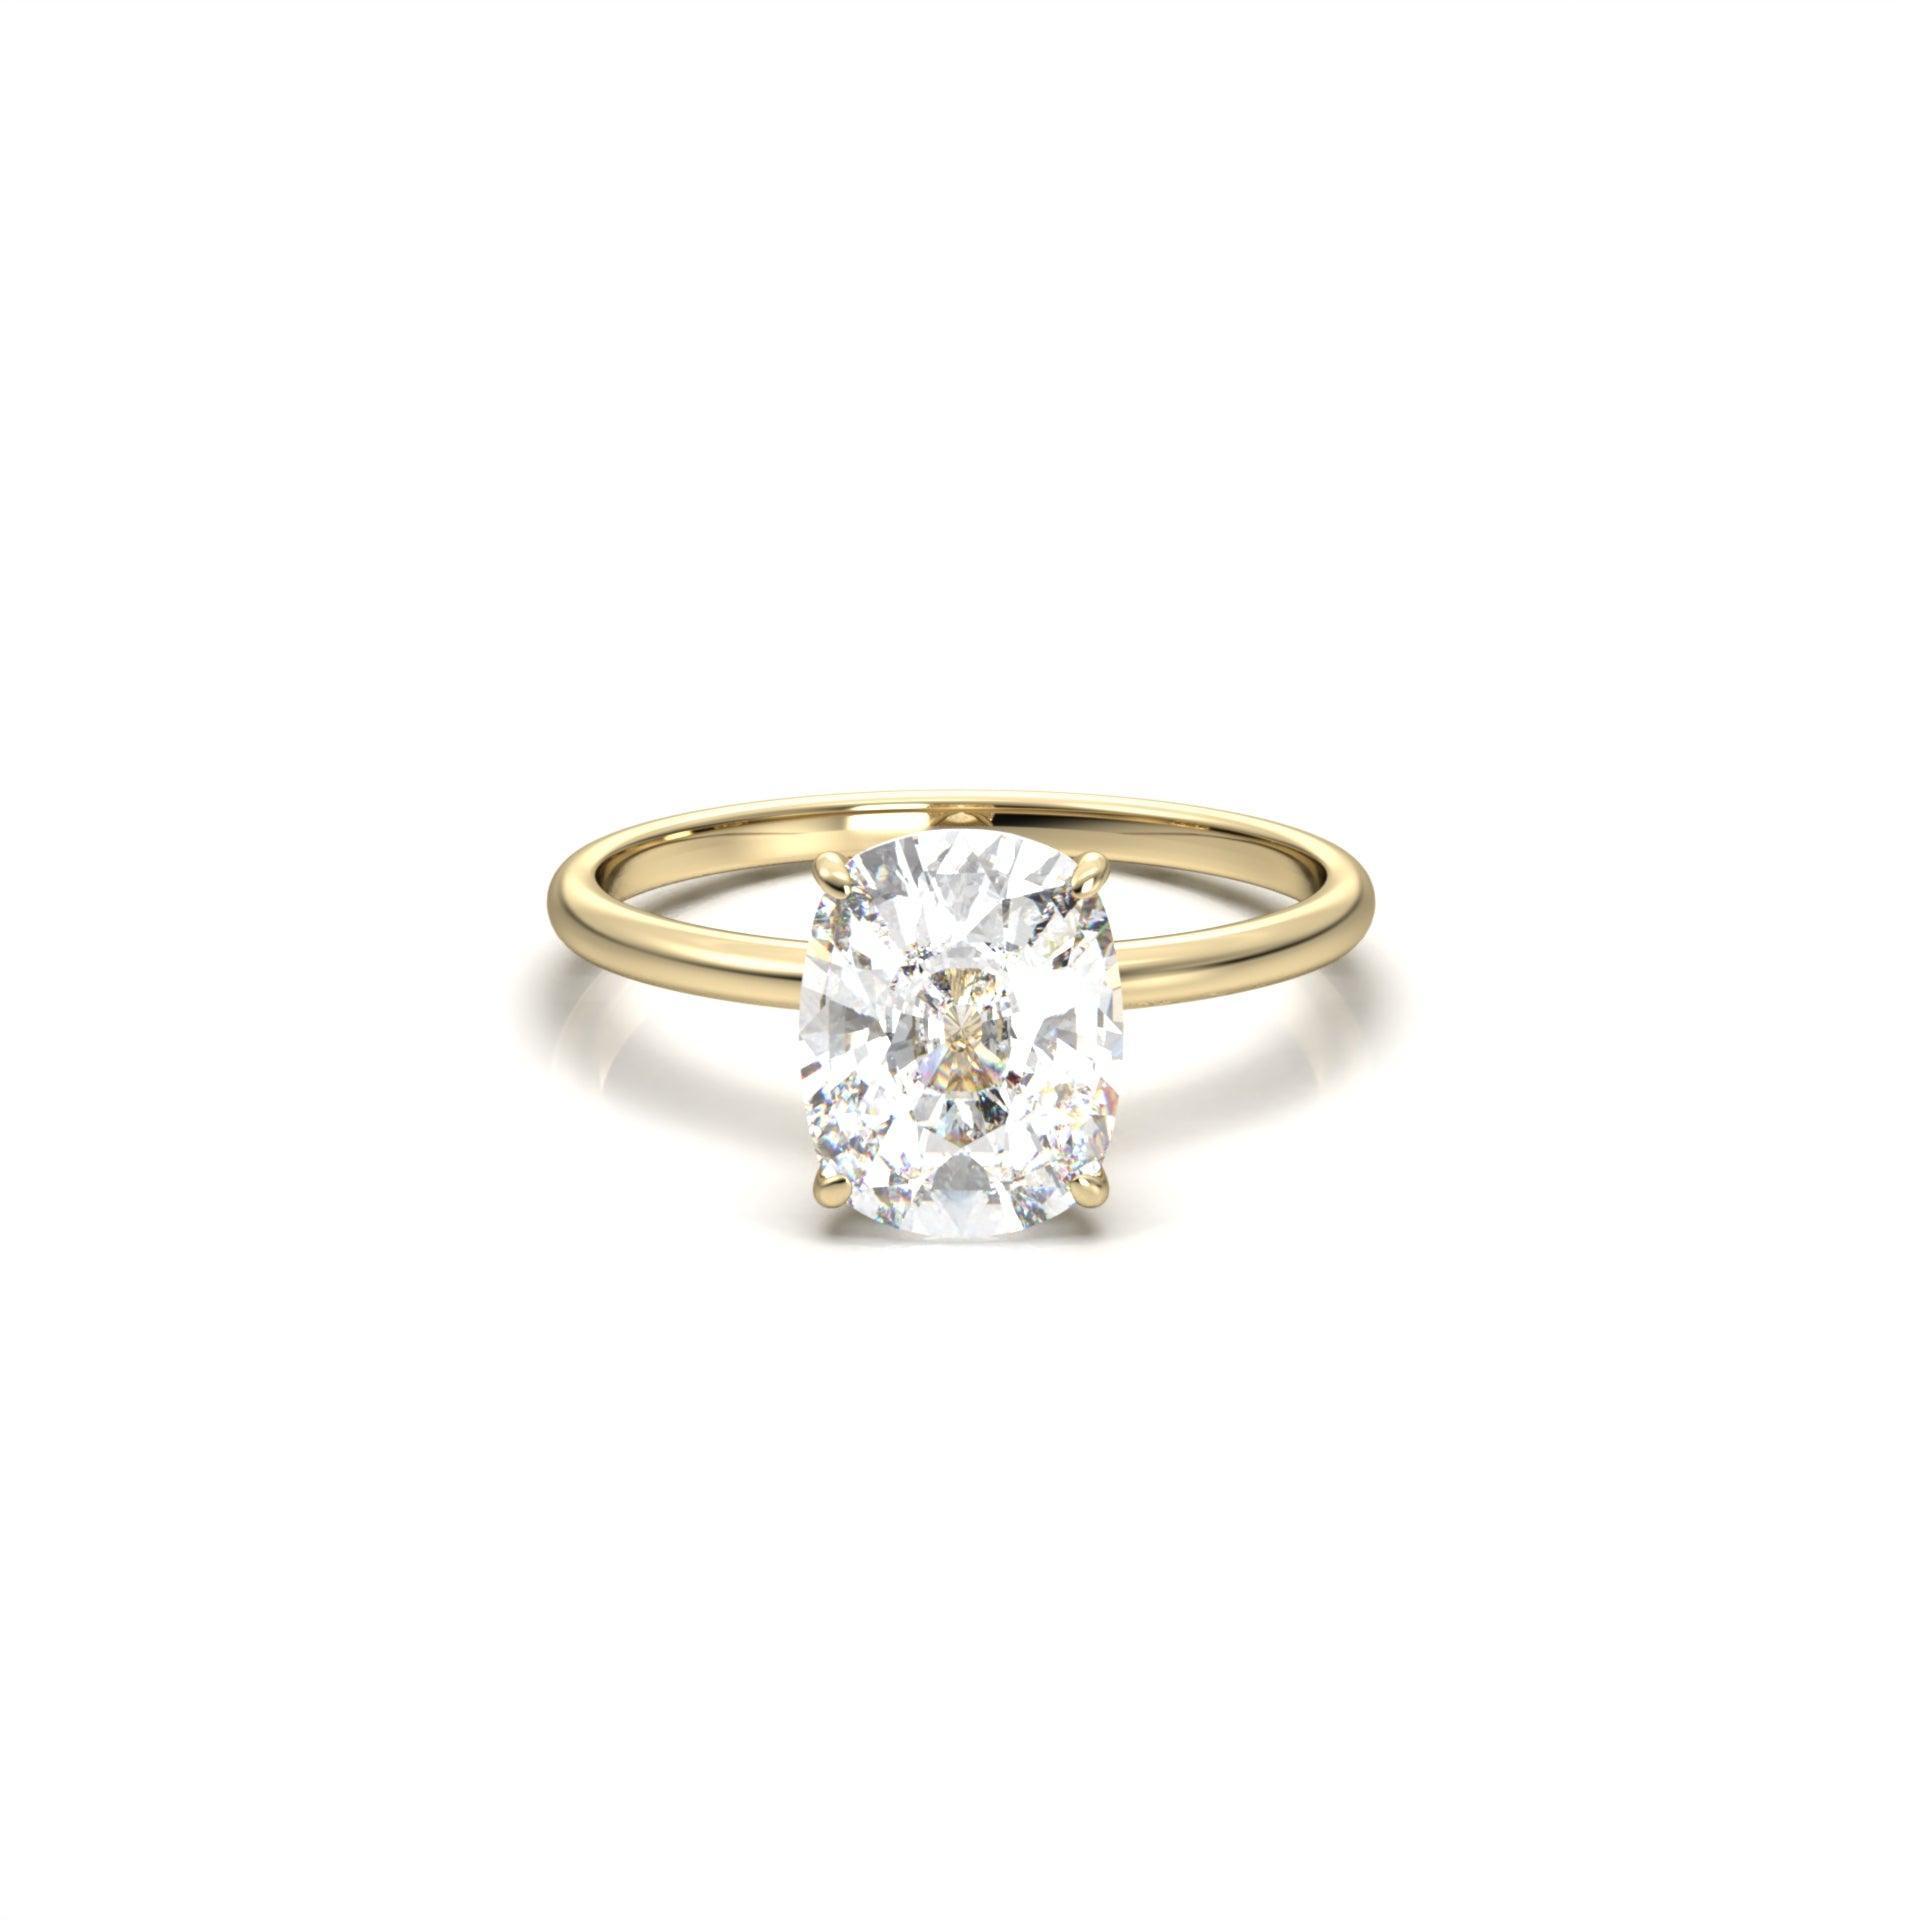 Elongated Cushion Cut Solitaire 4 Claw Moissanite Engagement Ring - moissaniteengagementrings